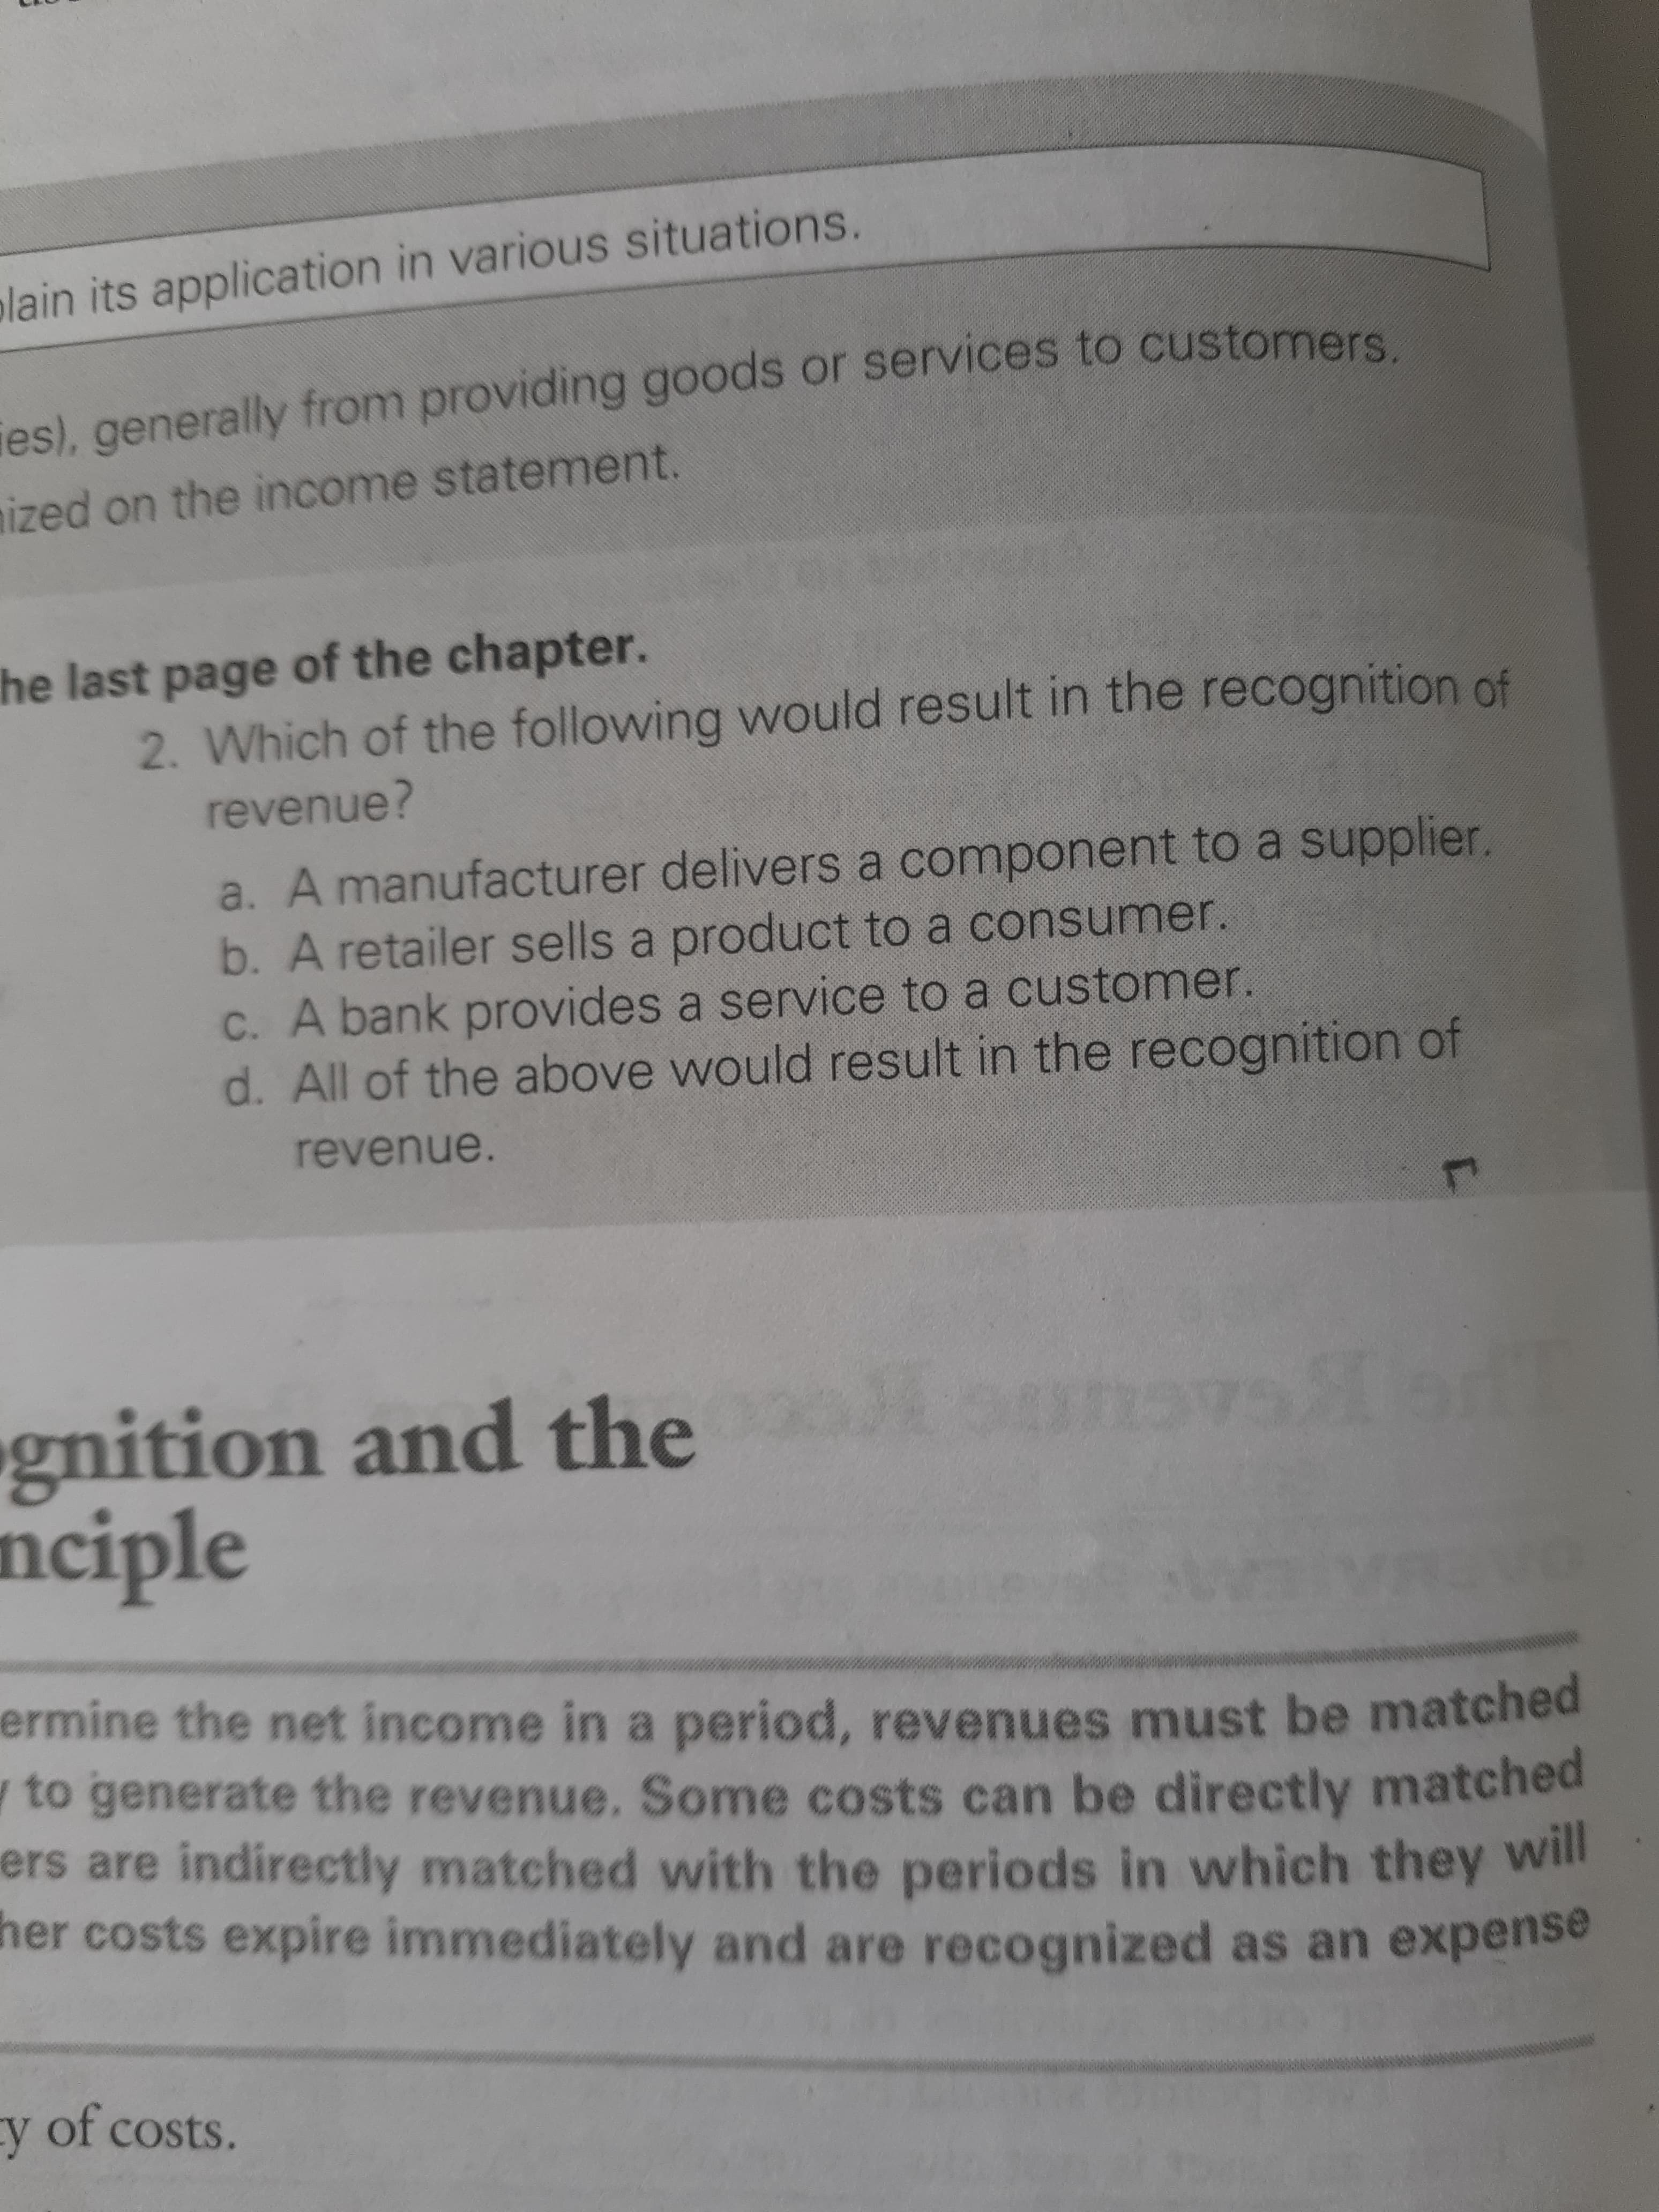 st page of the chapter.
2. Which of the following would result in the recognition of
revenue?
a. A manufacturer delivers a component to a supplier,
b. A retailer sells a product to a consumer.
C. A bank provides a service to a customer.
d. All of the above would result in the recognition of
revenue.
